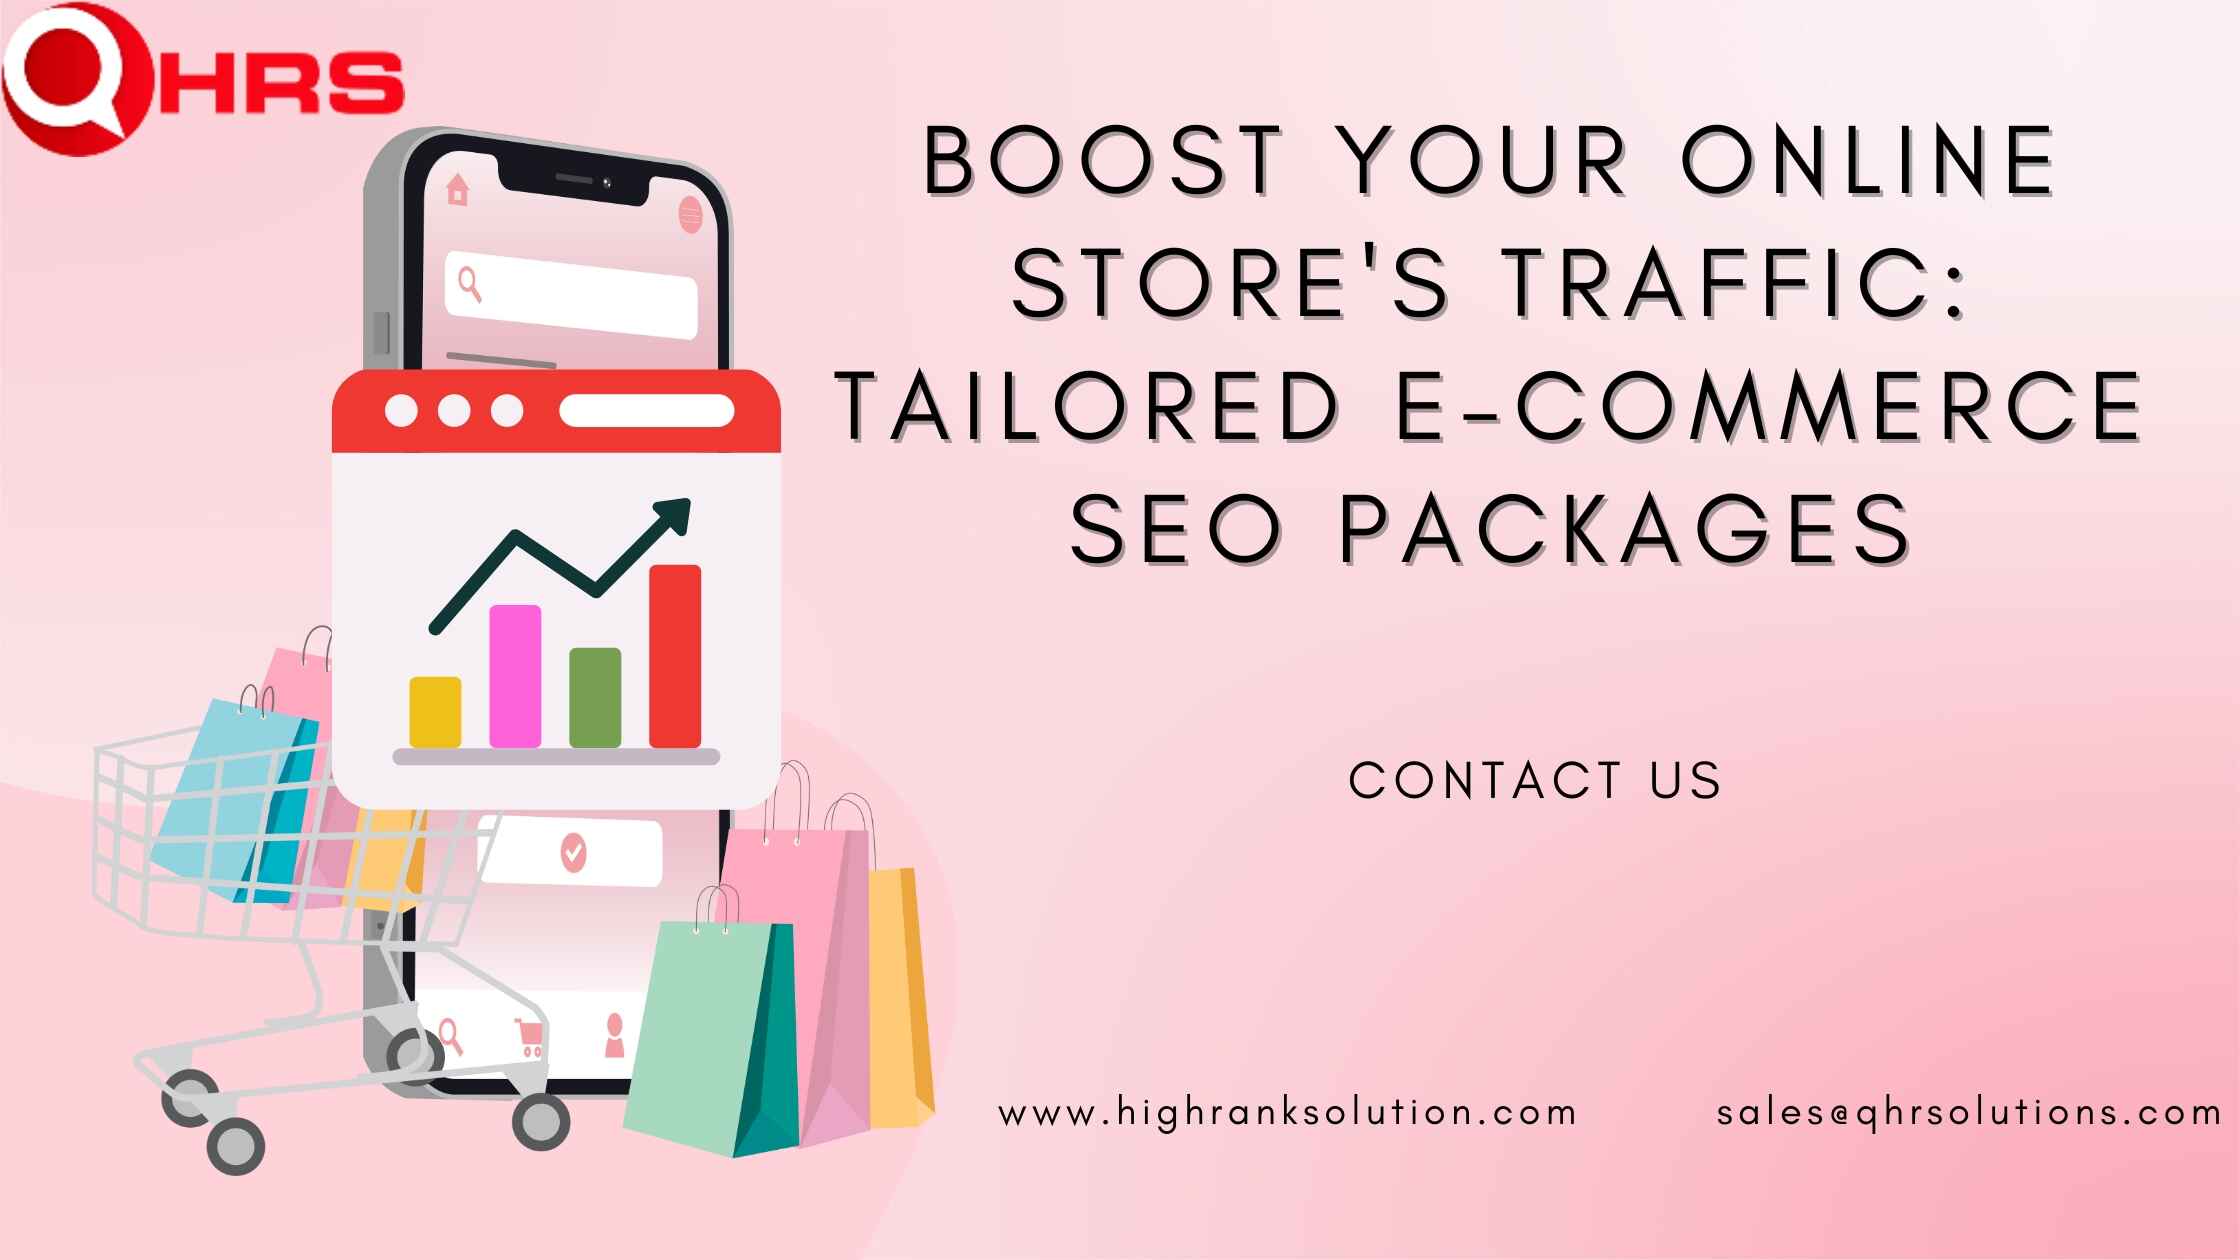 E-commerce SEO Packages